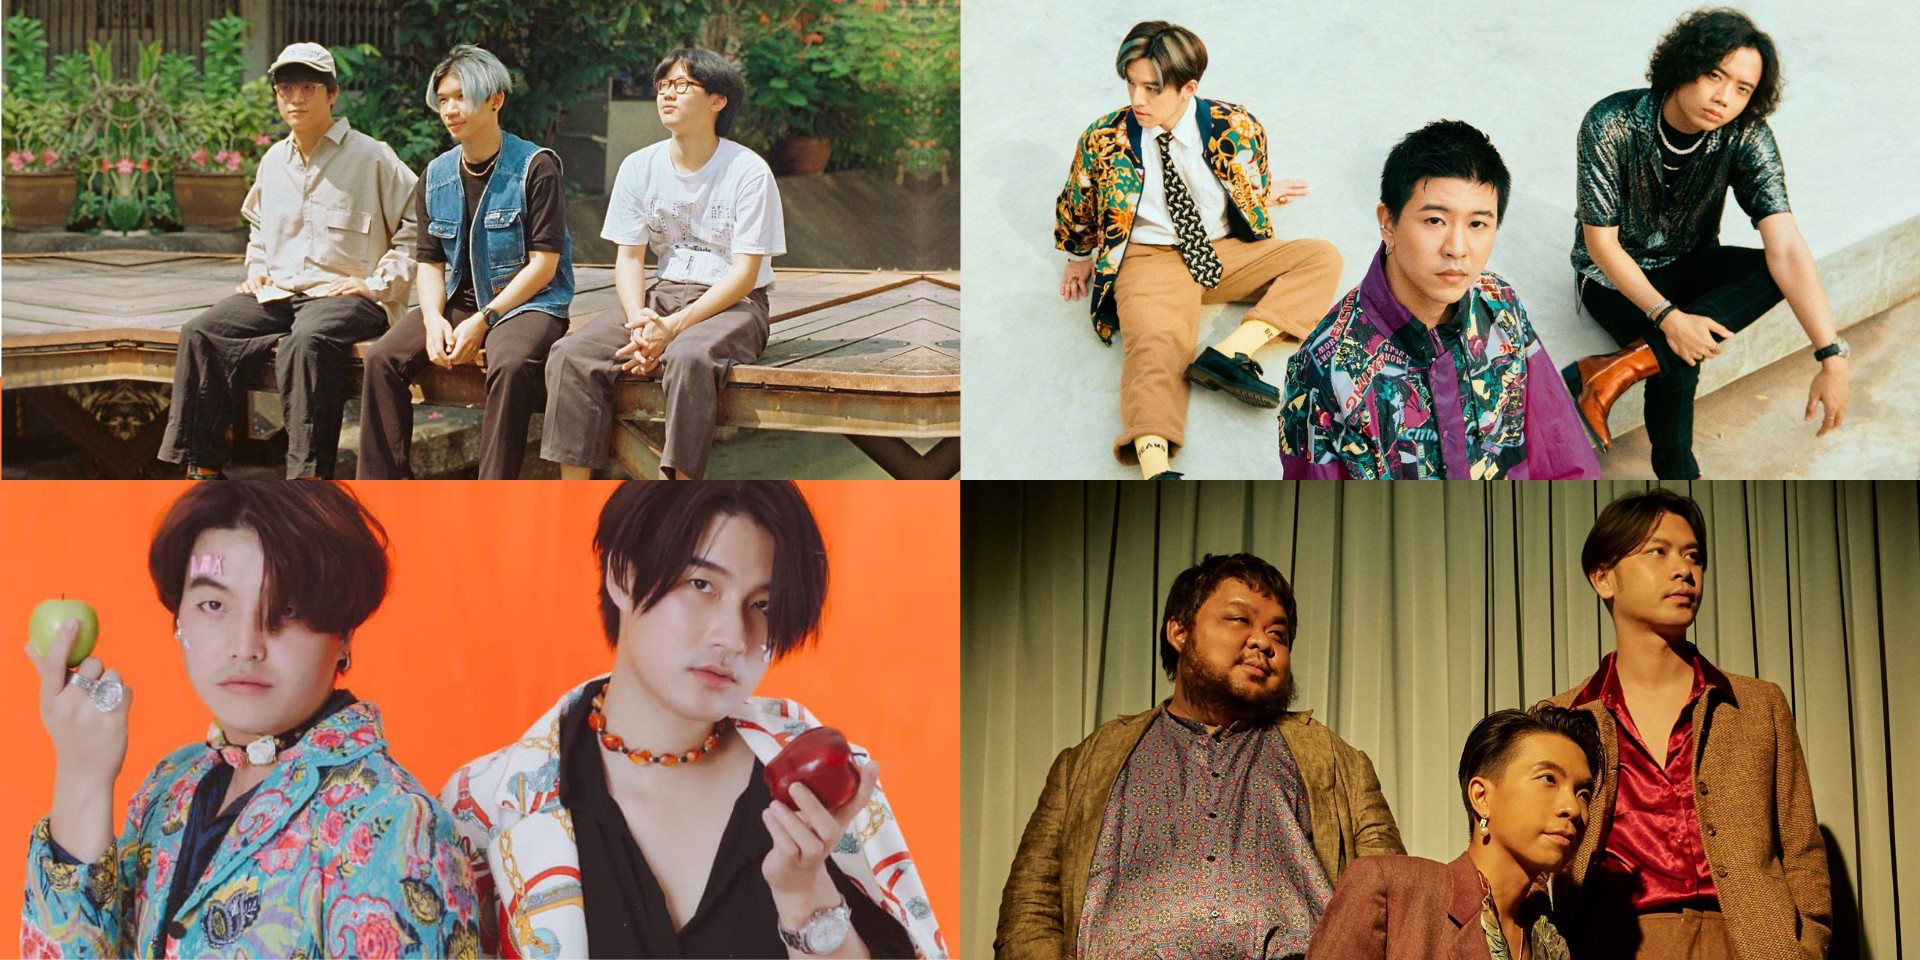 11 Thai indie acts to check out featuring Safeplanet, Tilly Birds, Polycat, Anatomy Rabbit, and more